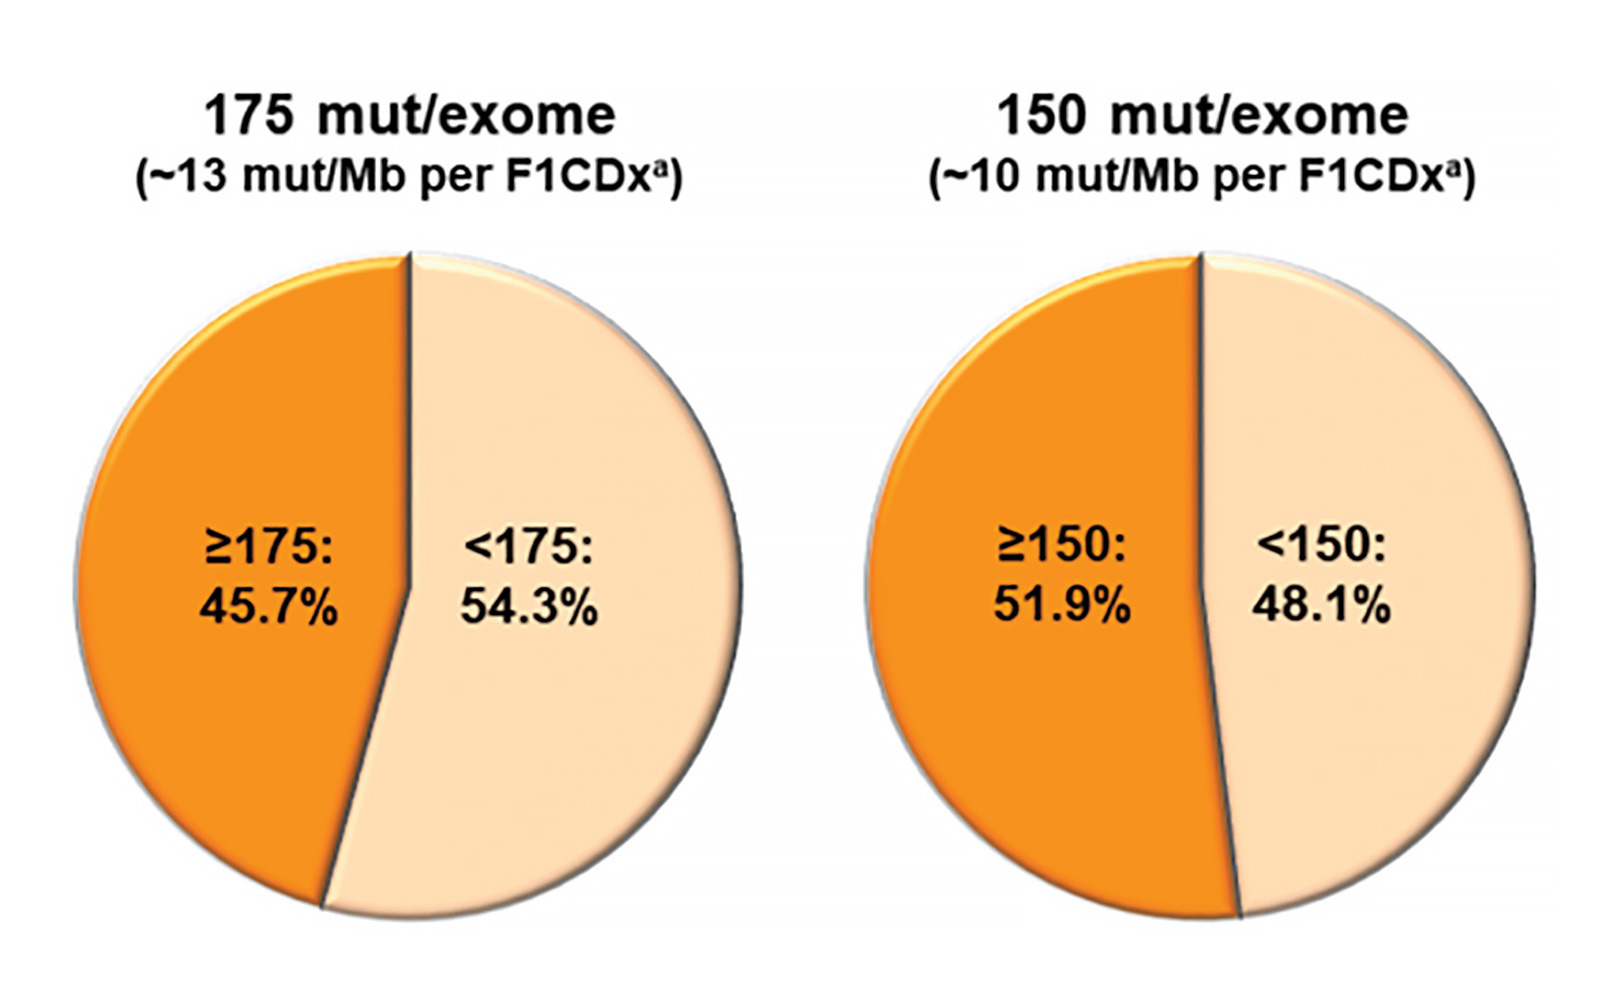 Tumor Mutation Burden: Evolution of a Controversial Biomarker From the Pathologist’s Perspective